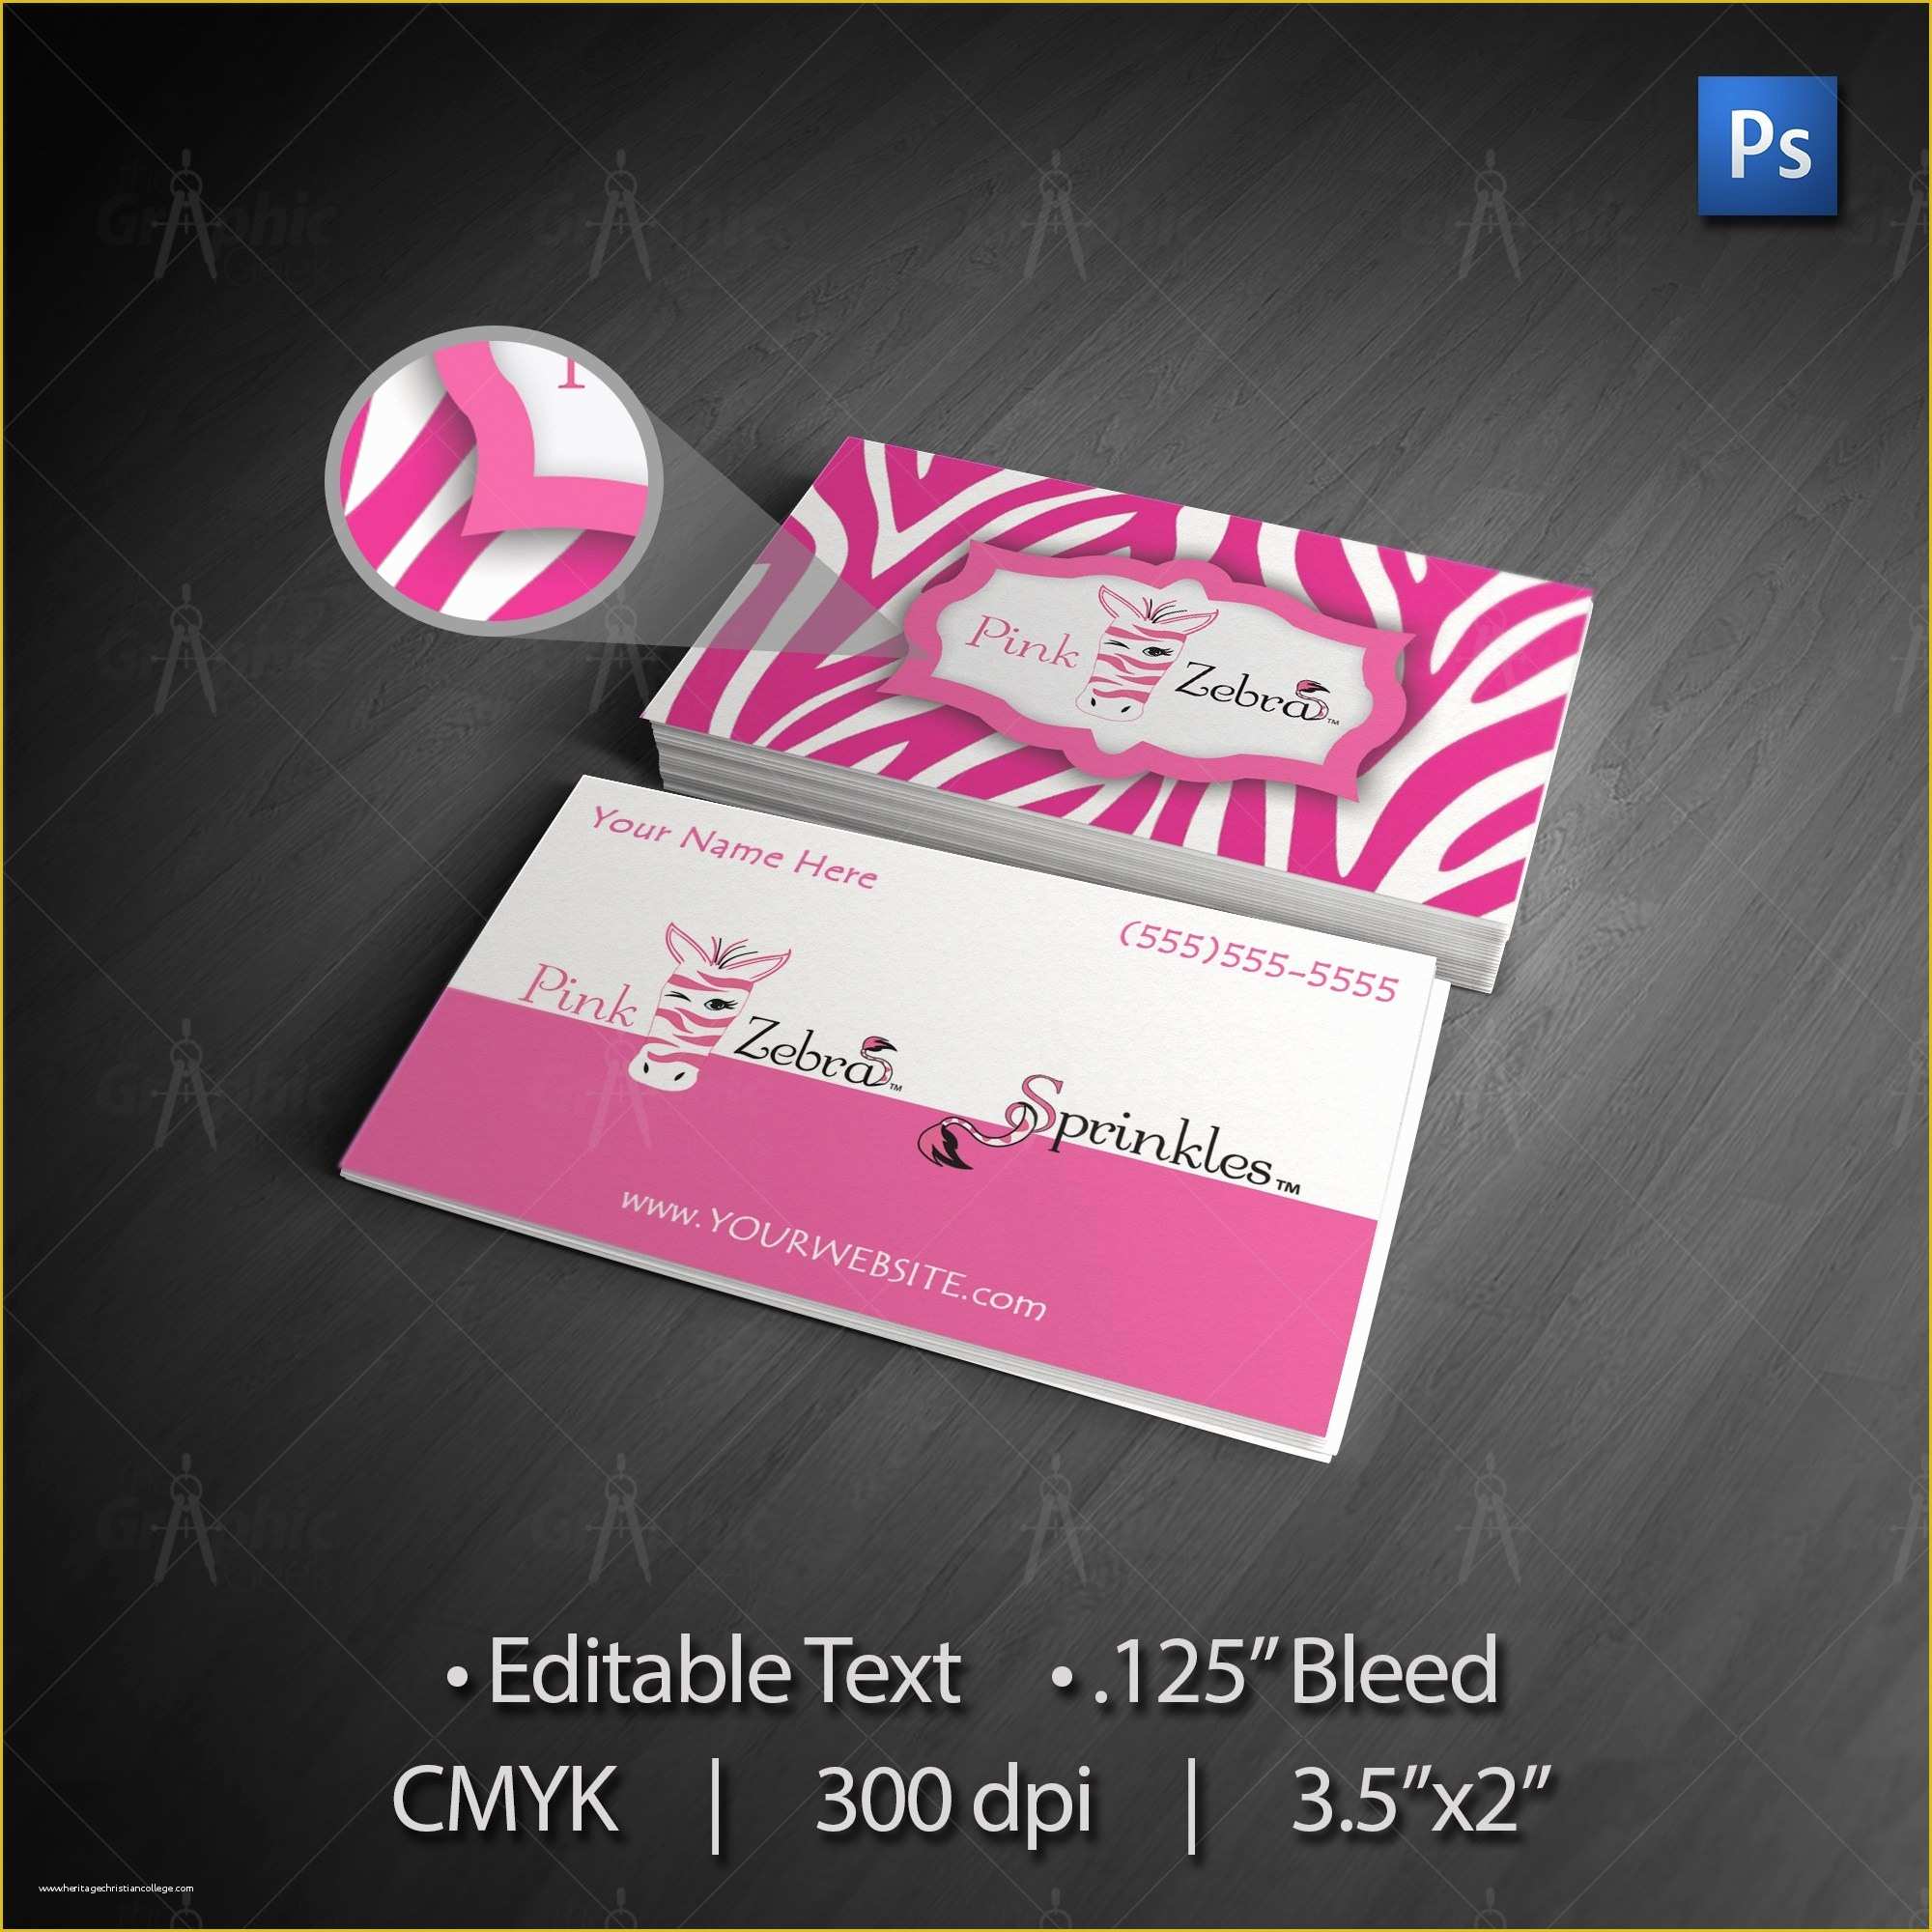 Pink Zebra Business Card Template Free Of Pink Zebra Business Card Shop Template the Graphic Geek